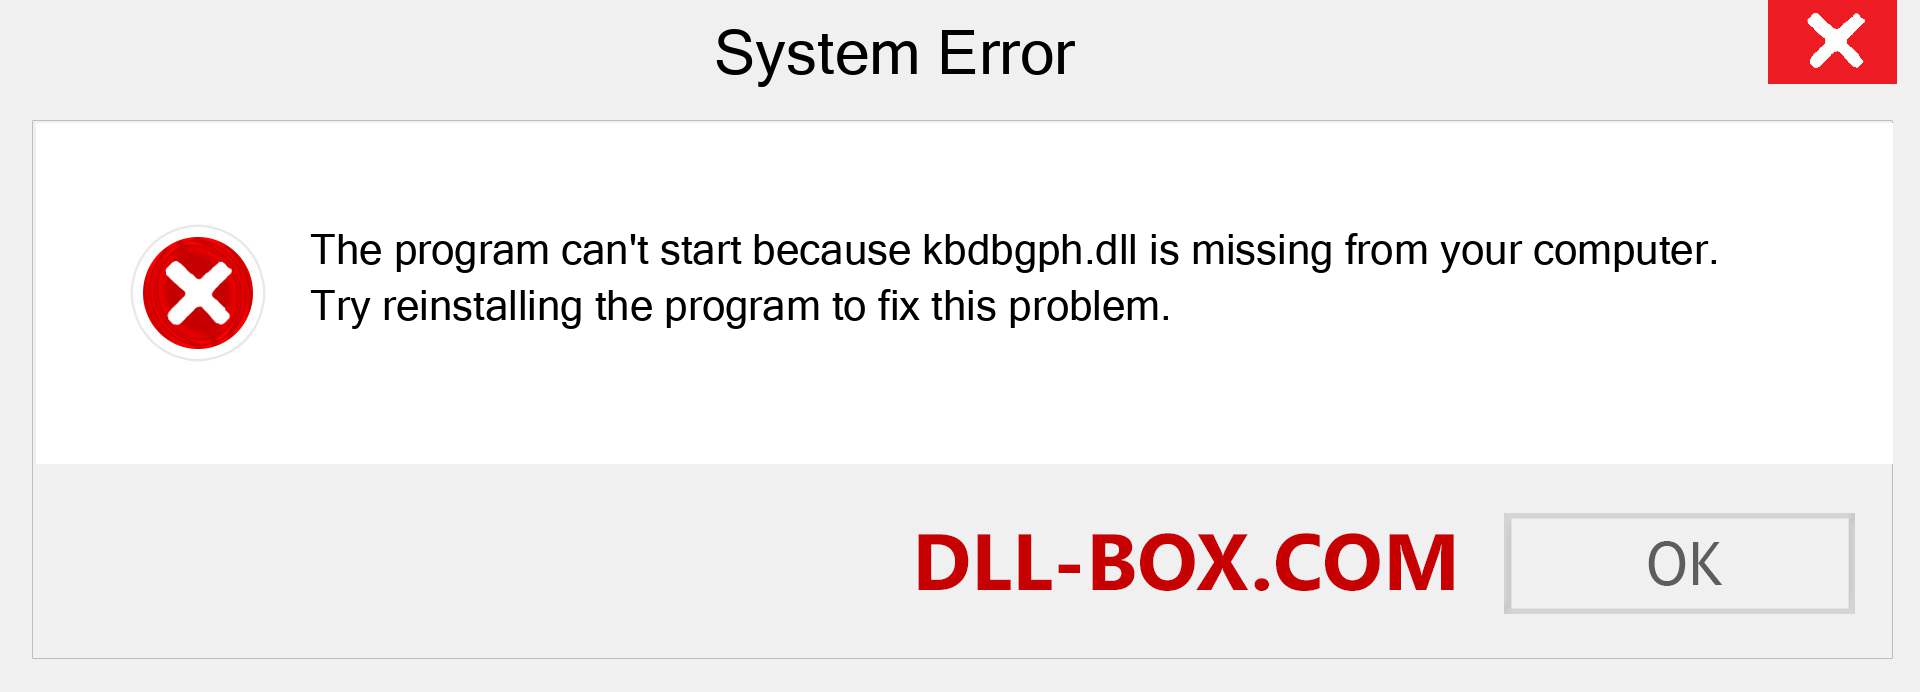  kbdbgph.dll file is missing?. Download for Windows 7, 8, 10 - Fix  kbdbgph dll Missing Error on Windows, photos, images